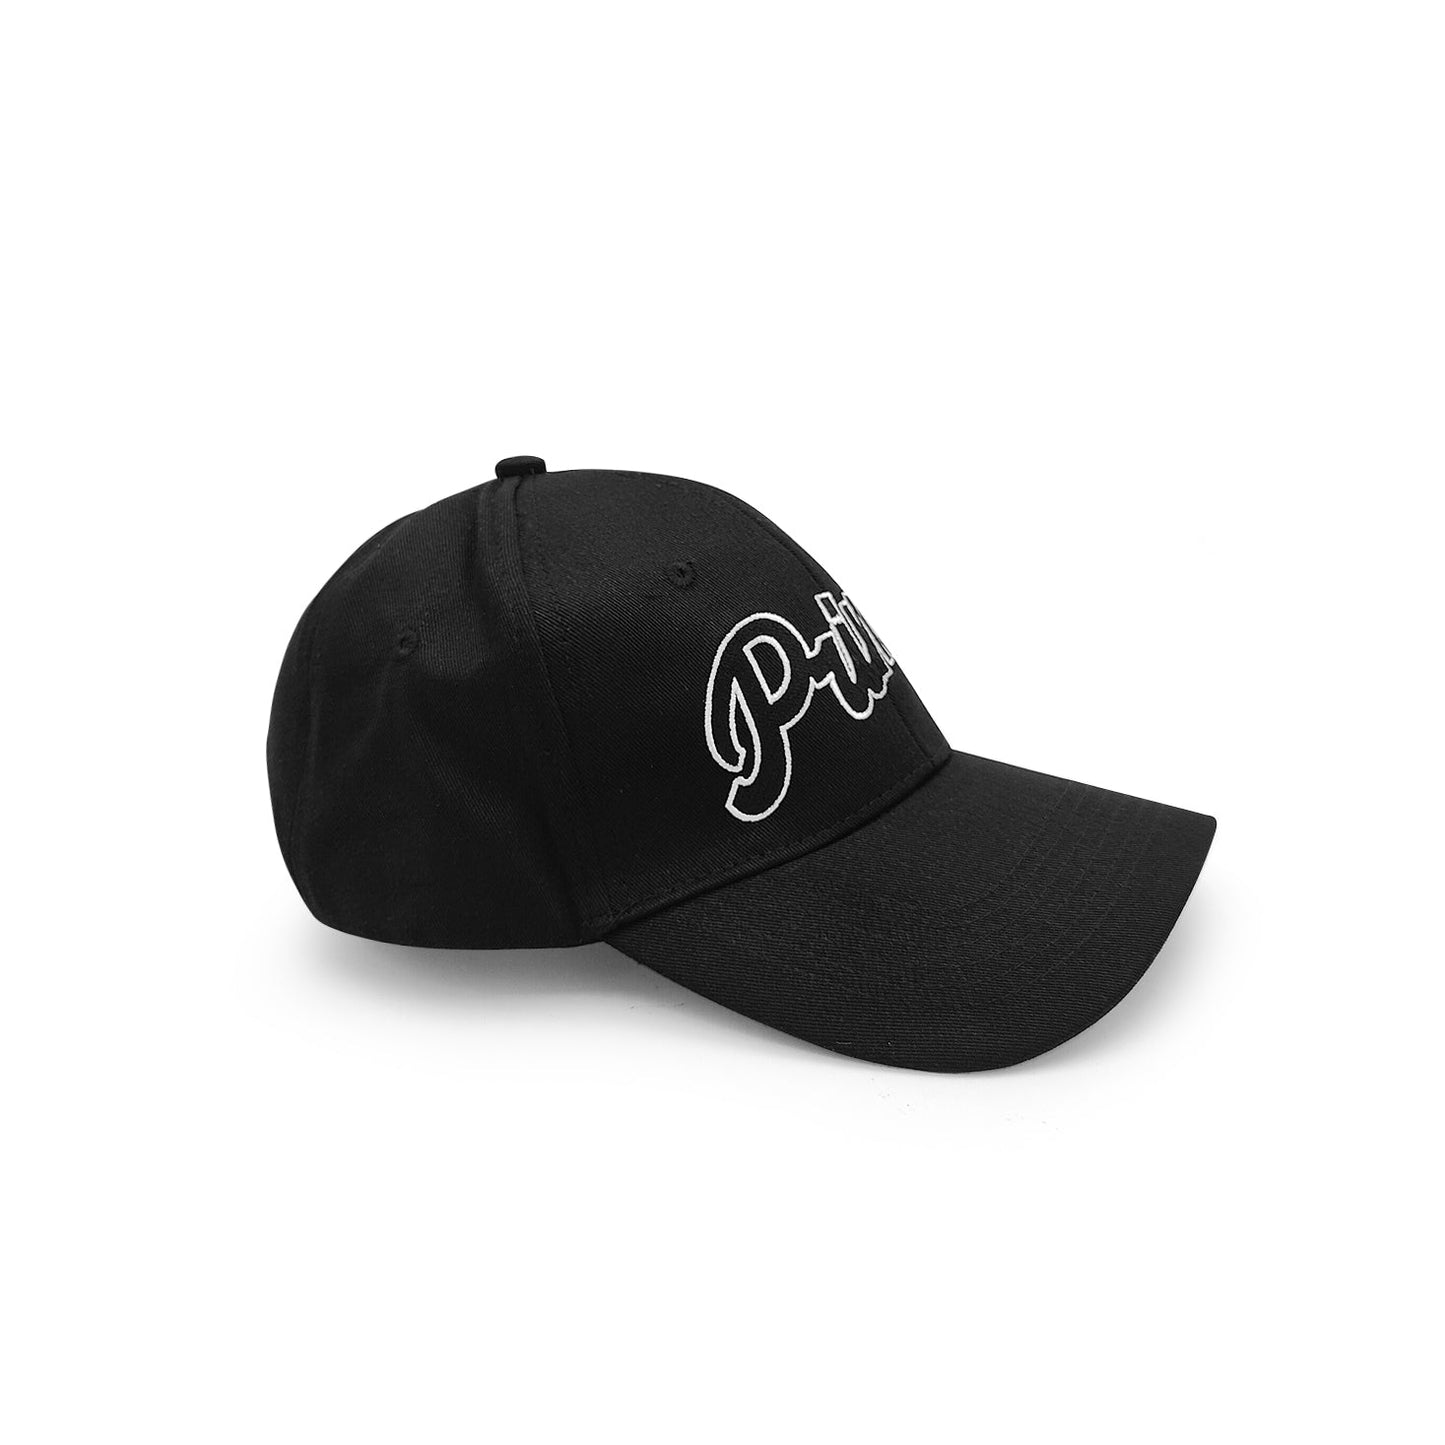 Primo Primo Limited Edition Snap Back - Black